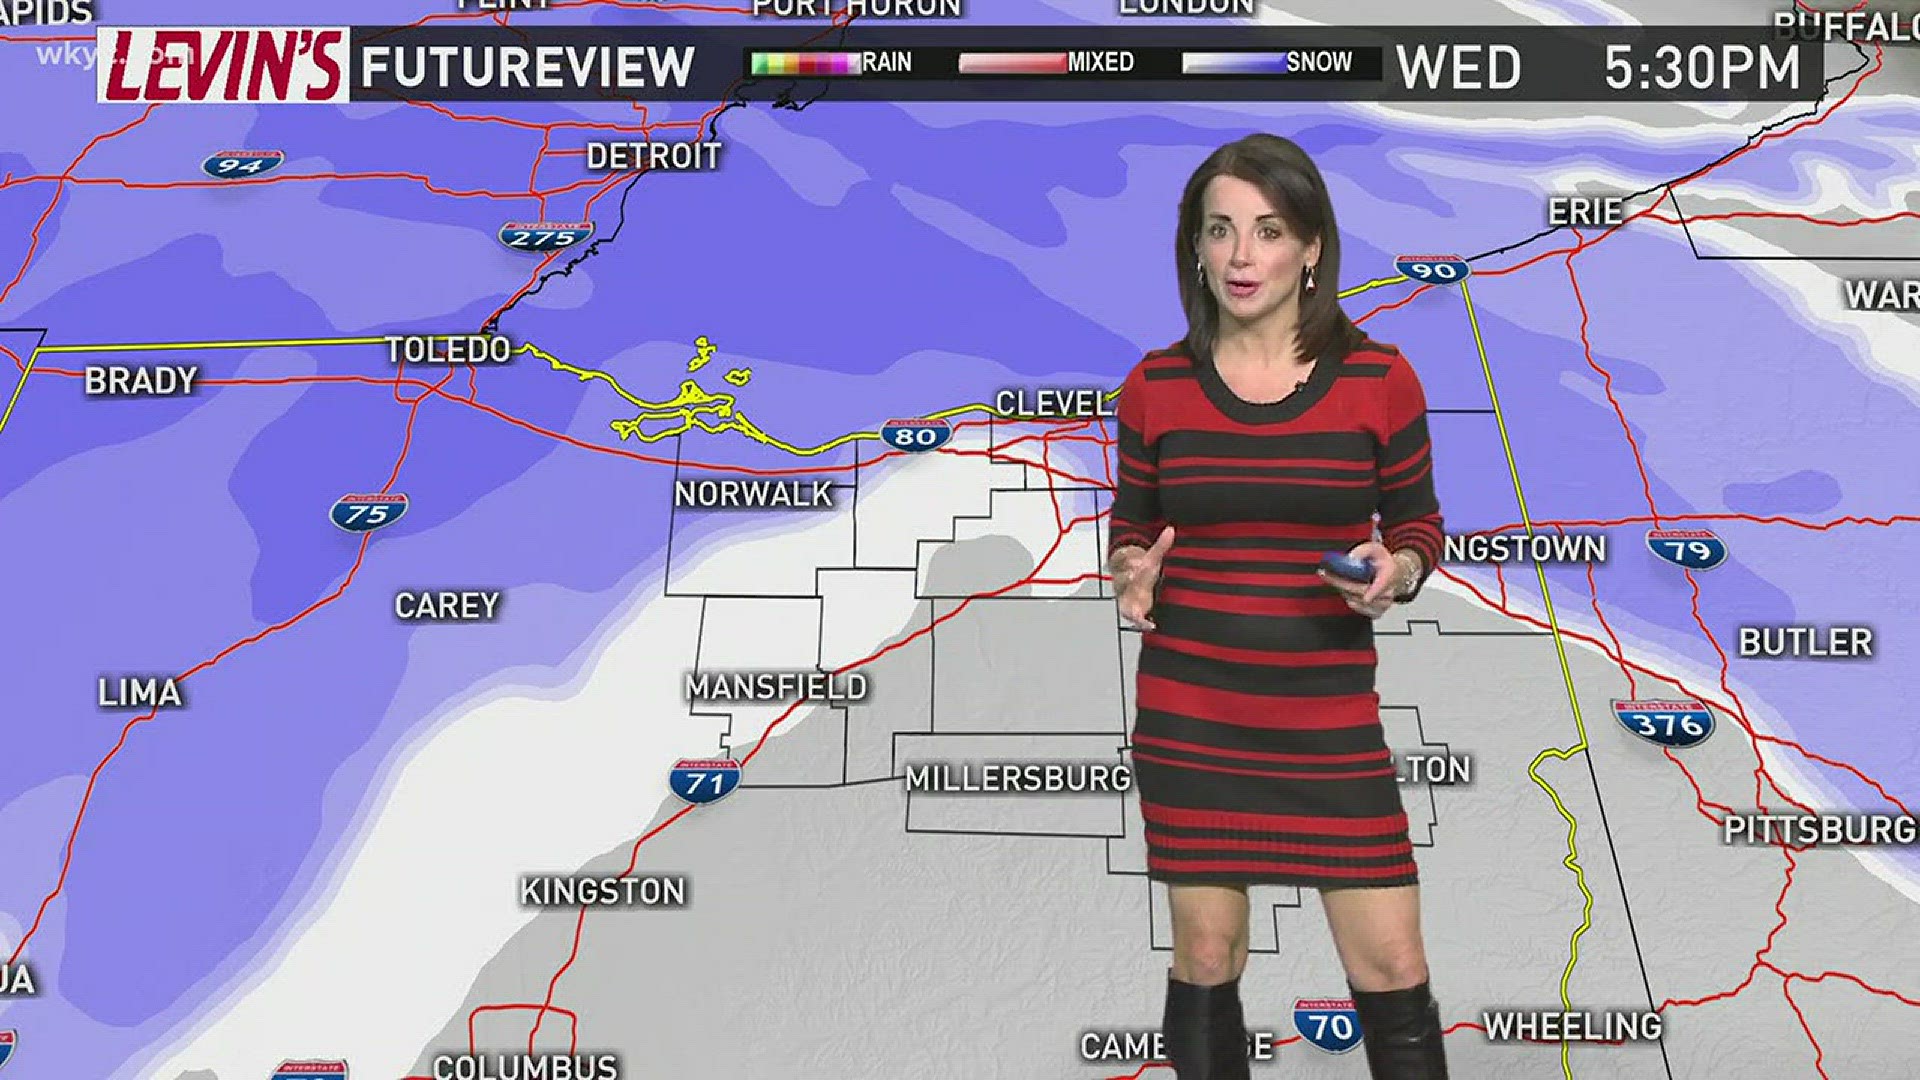 More snow is coming to Northeast Ohio after a day of heavy lake effect snow slammed portions of the area. Hollie Strano has the details...